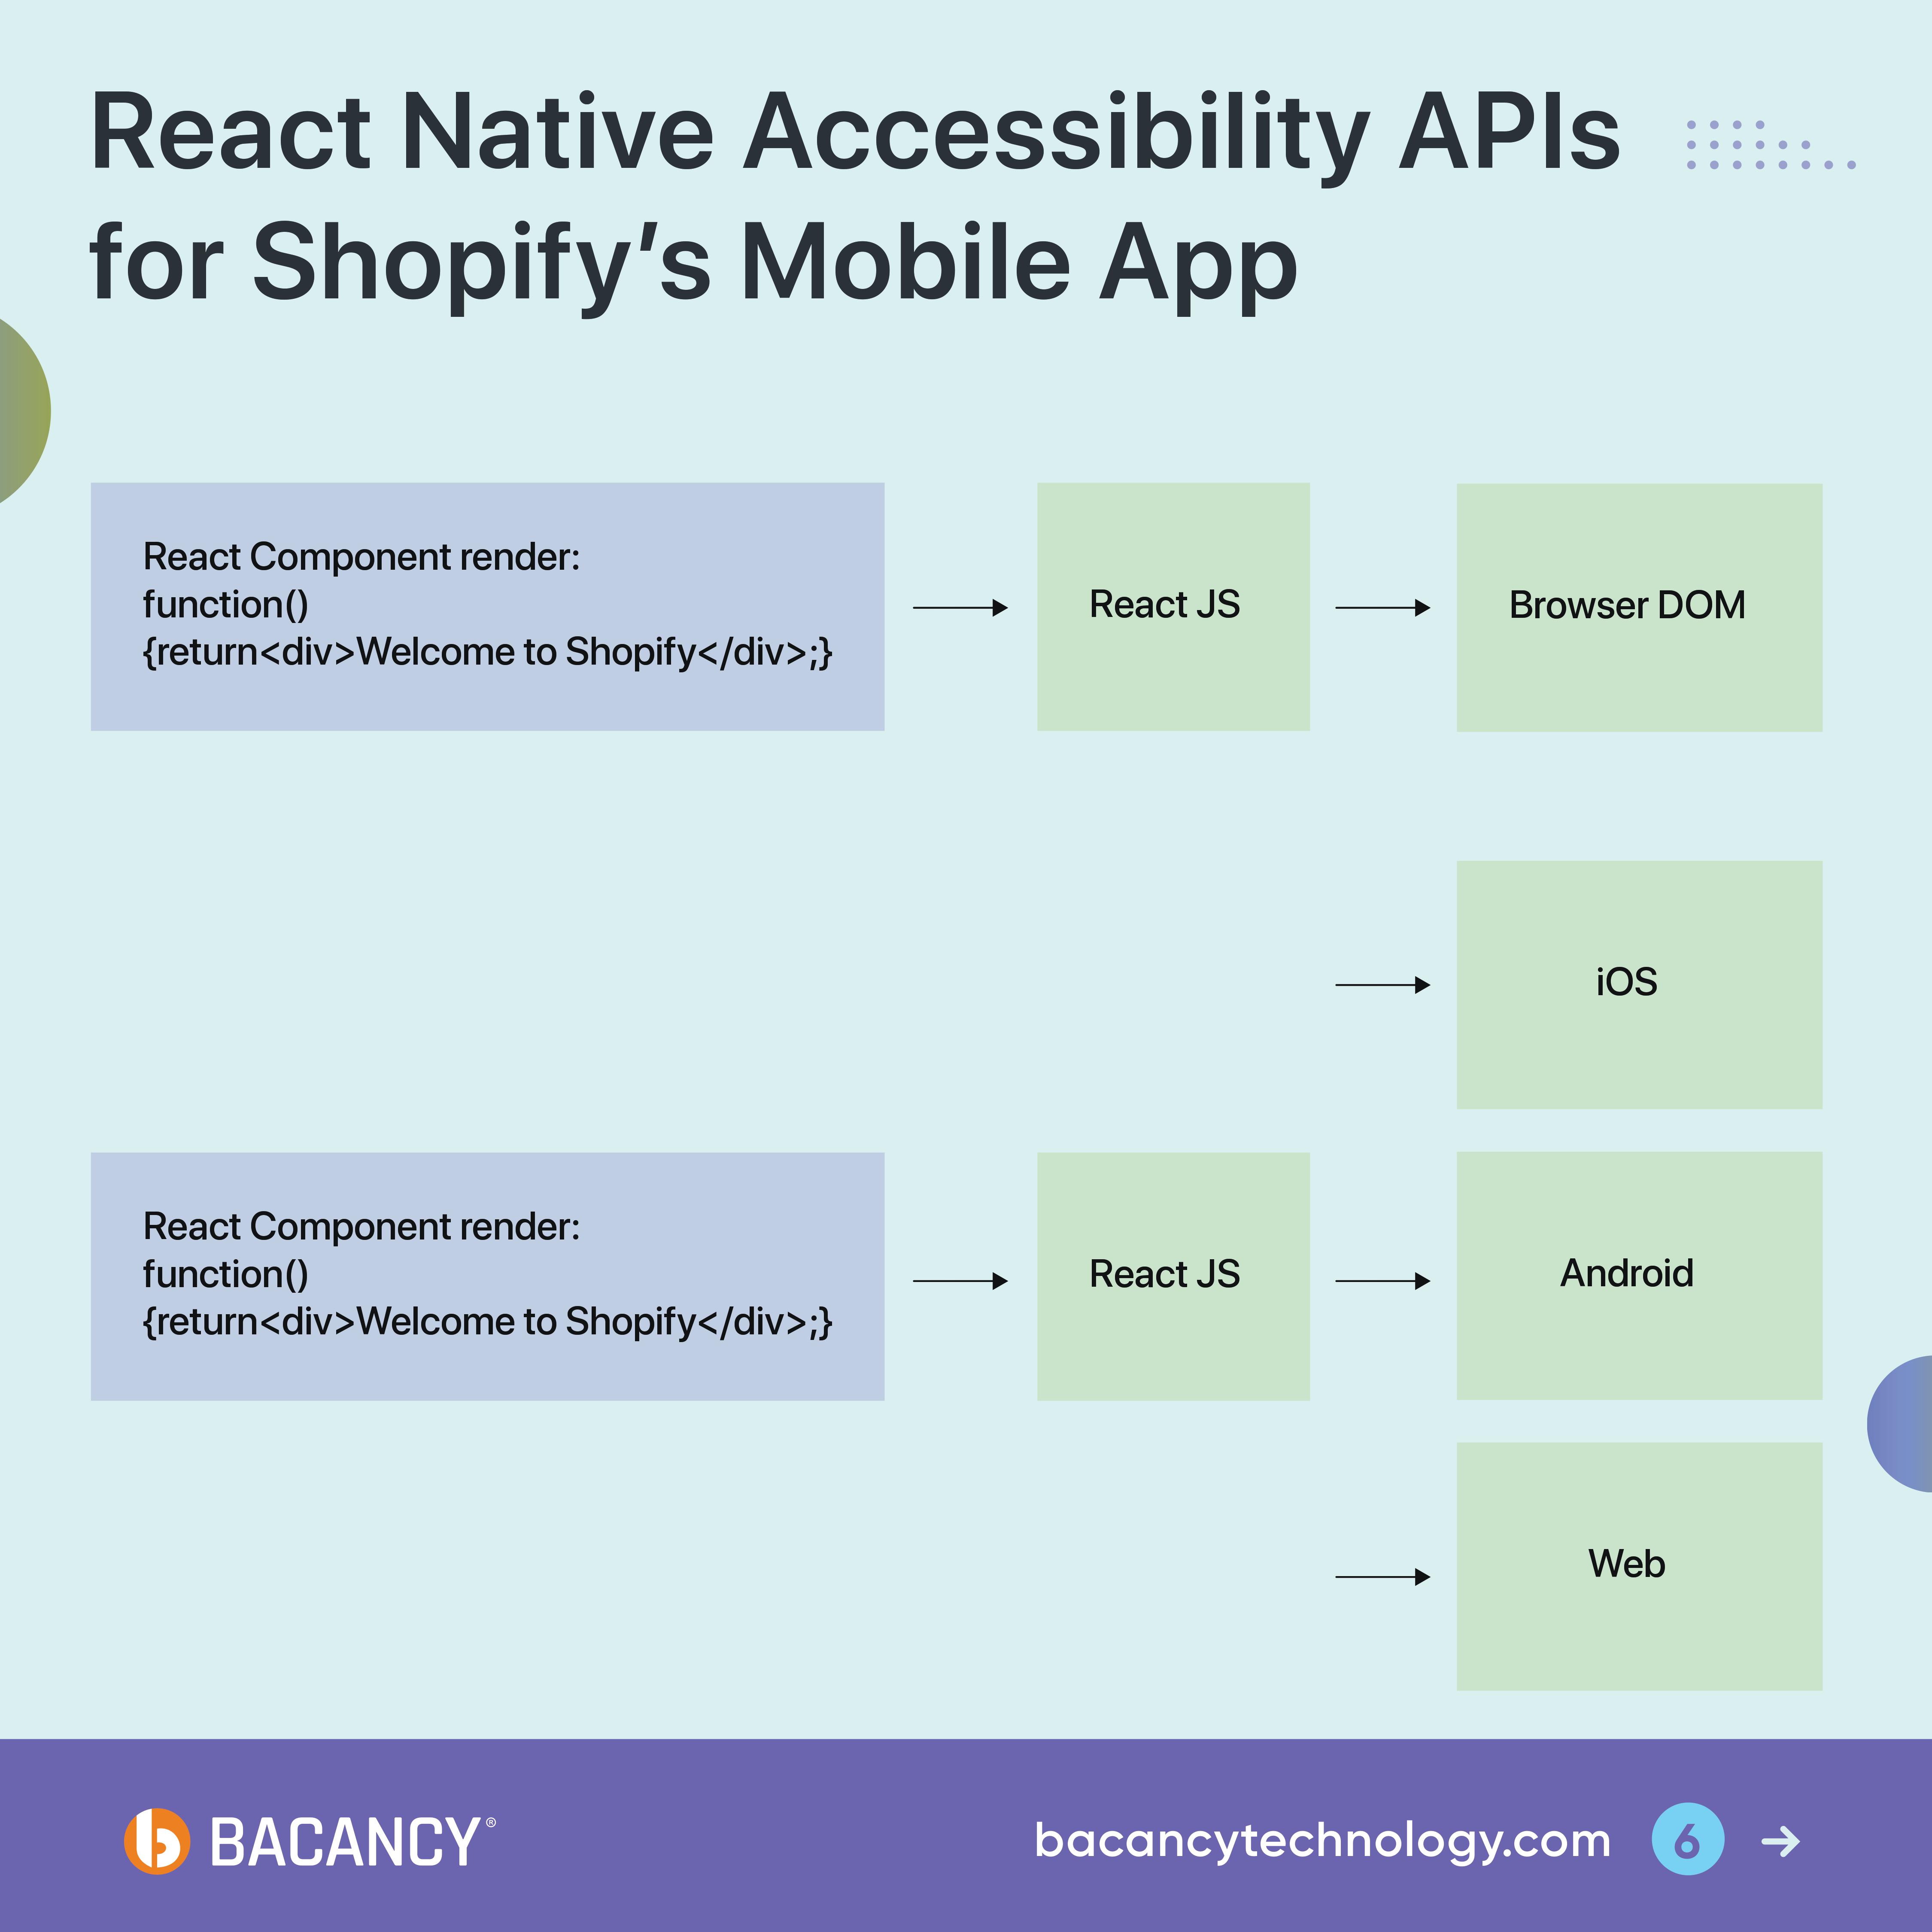 How React Native bet became the Future for Mobile apps at Shopify